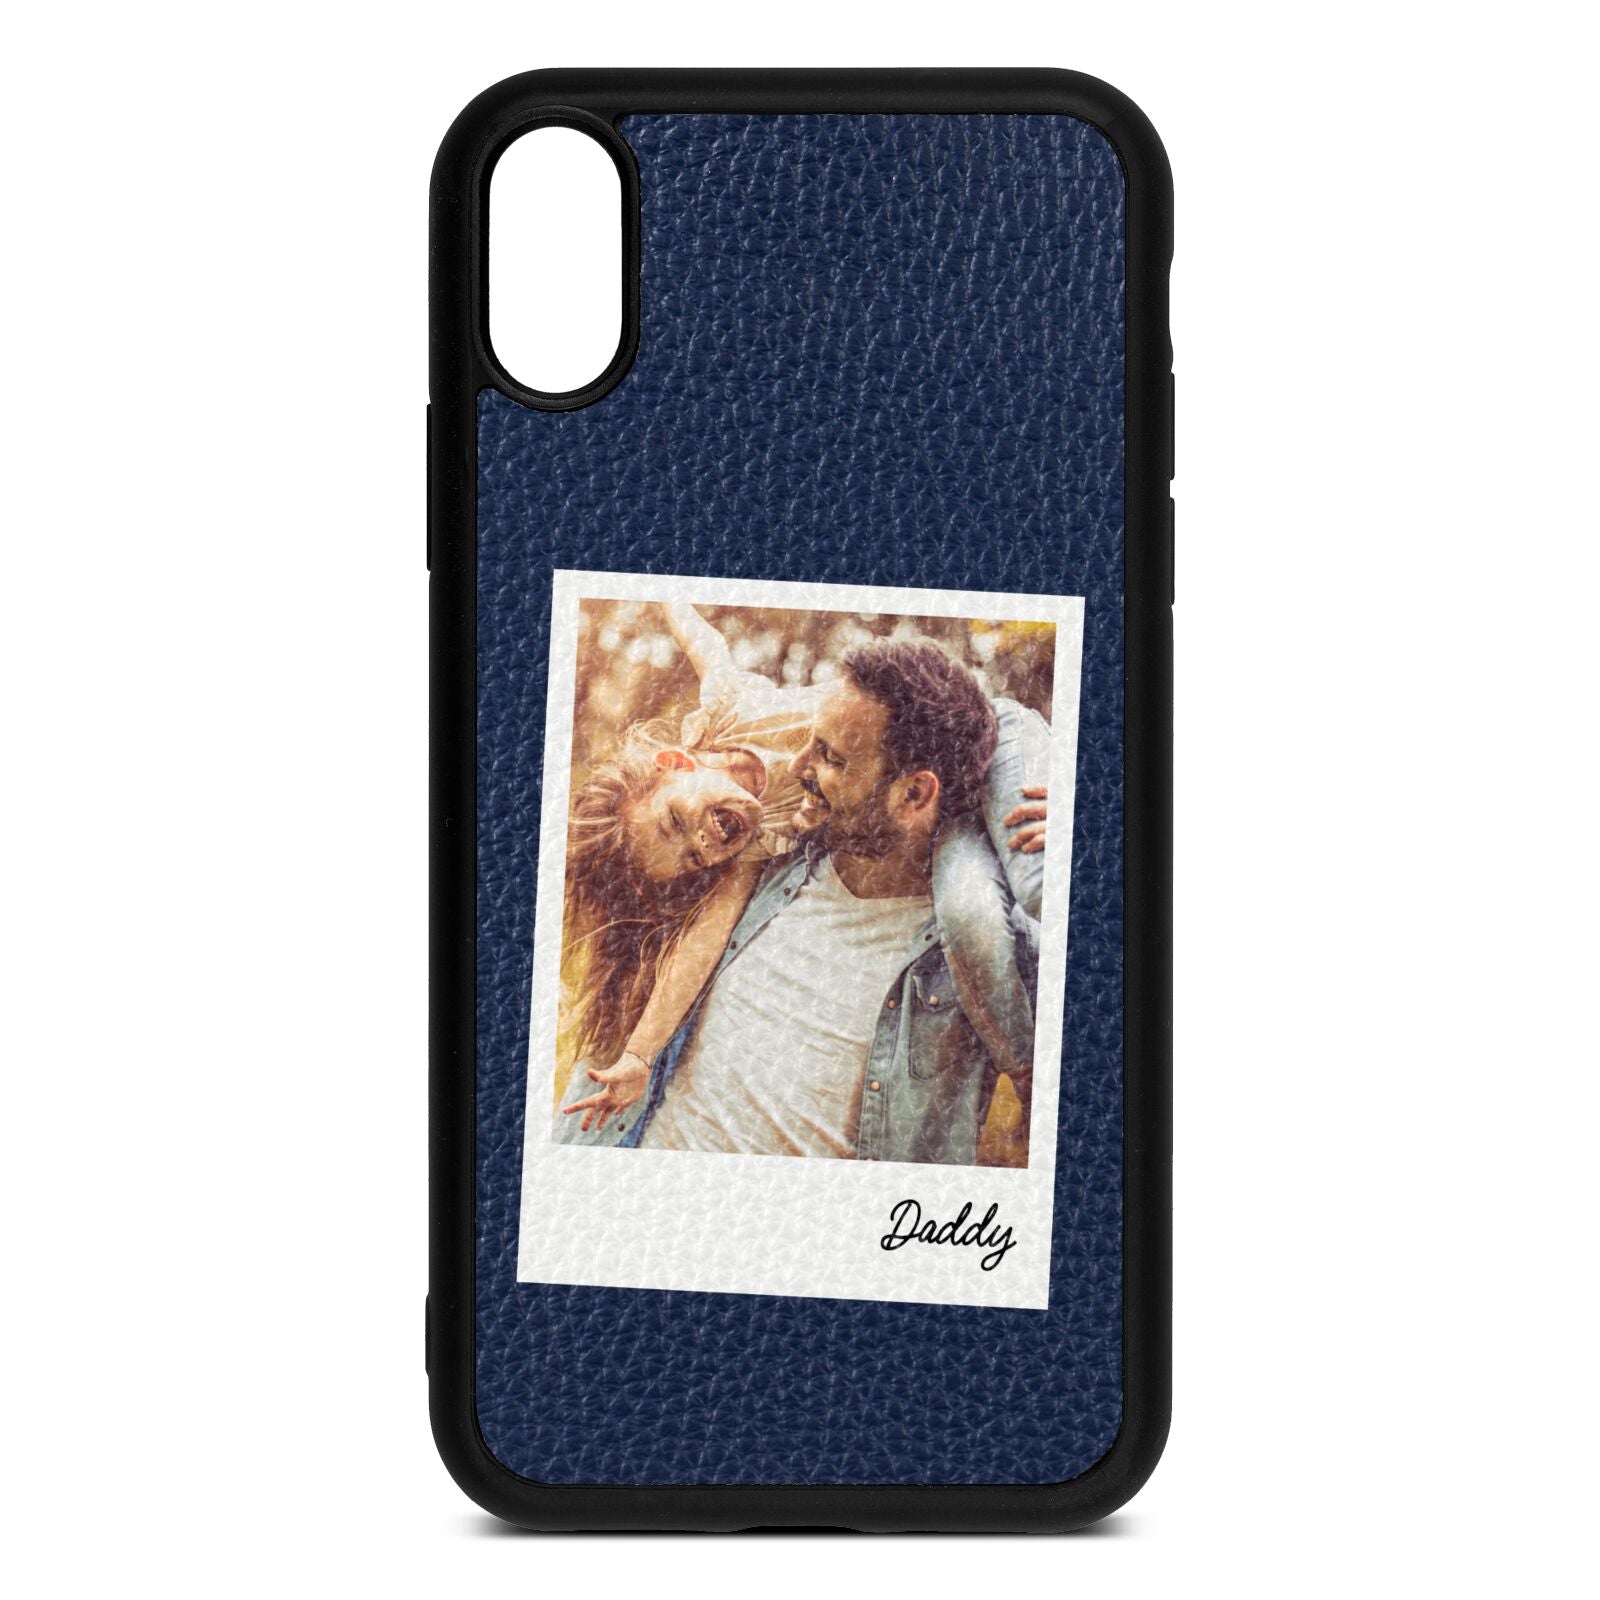 Fathers Day Photo Navy Blue Pebble Leather iPhone Xr Case